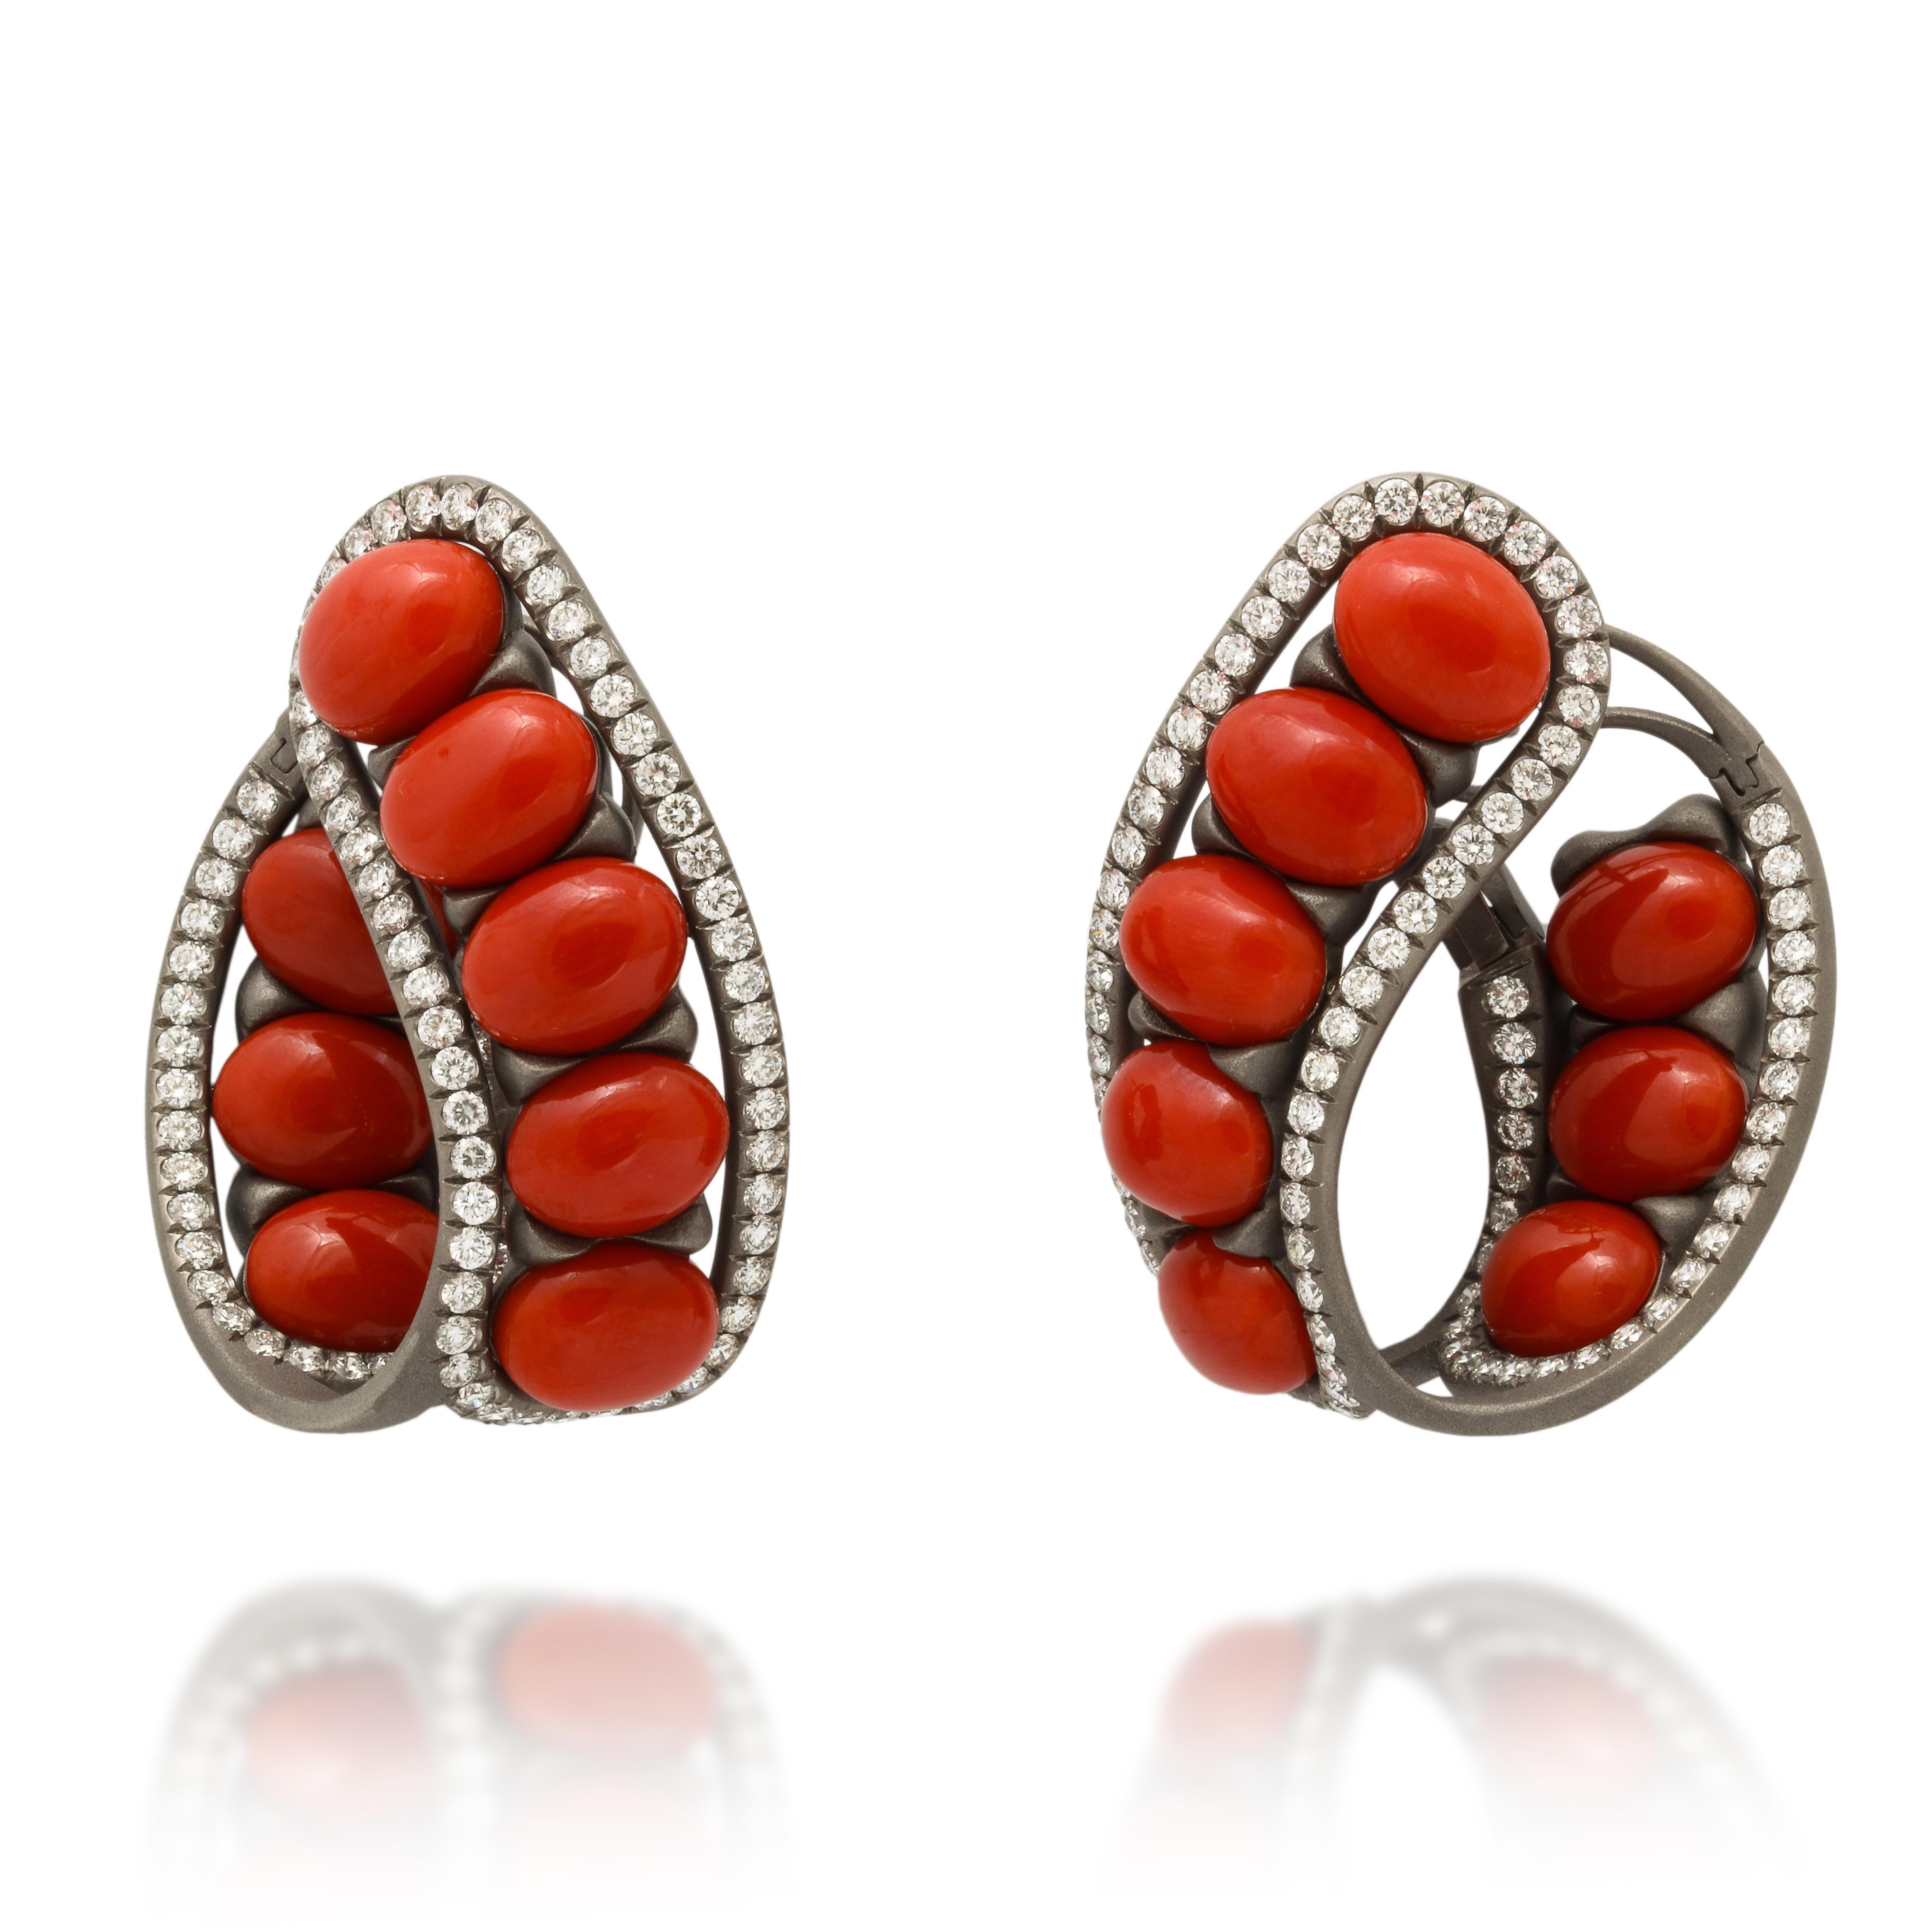 A bold and striking design, featuring bright red Mediterranean coral, framed with diamonds and mounted in brushed grey titanium.   At a full 1 1/2 x 1 1/4 inches these are definitely statement earrings, however the use of titanium makes them just